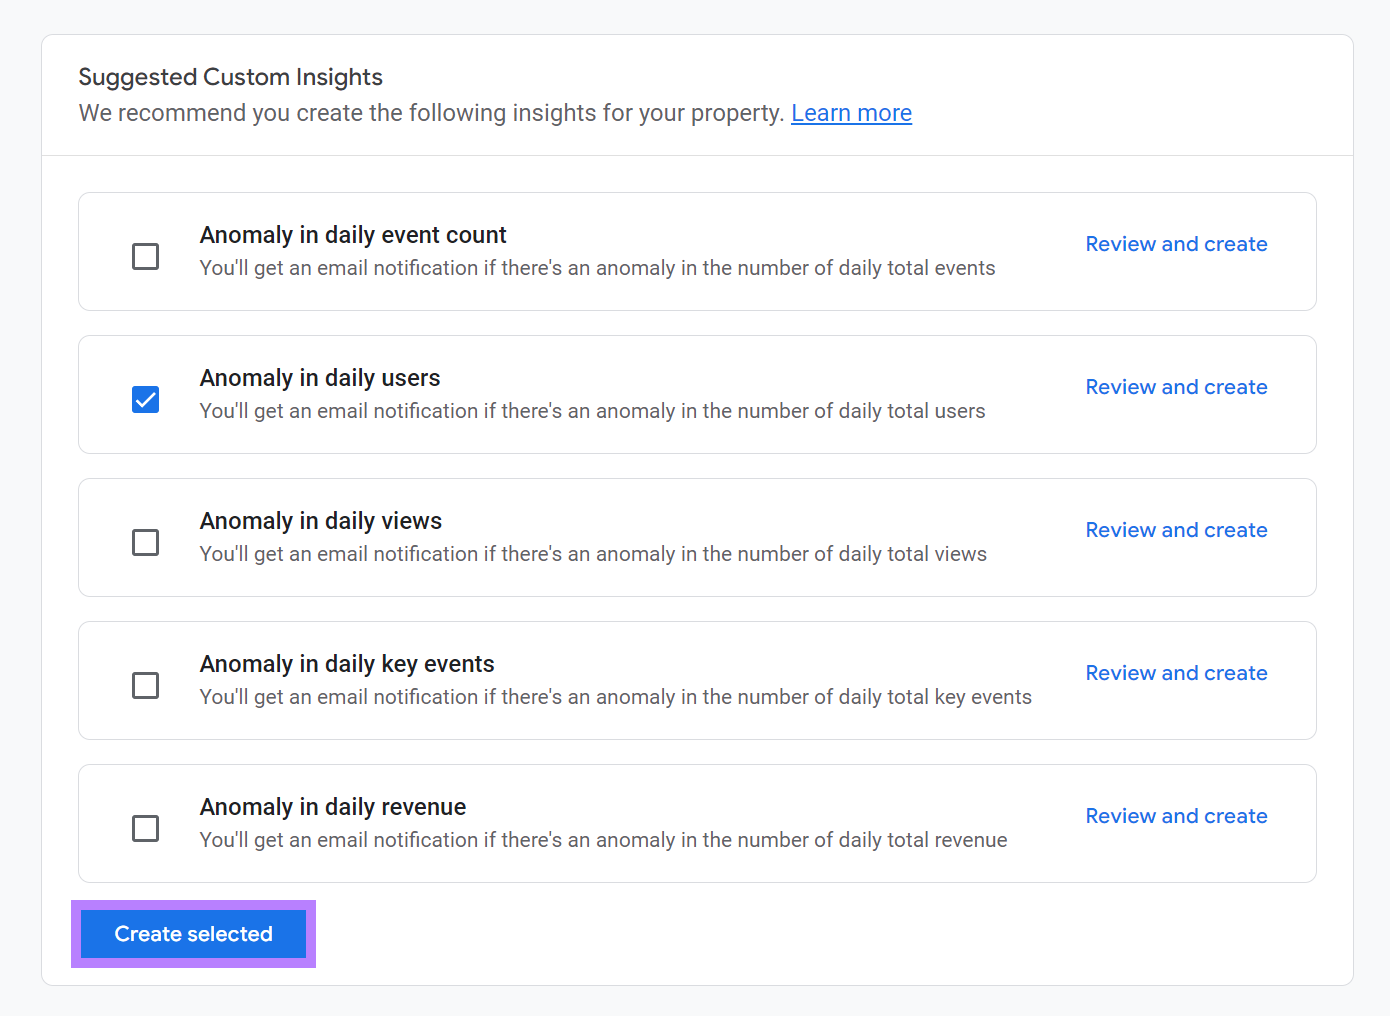 All custom insights except Anomaly in daily users unchecked and Create selected button highlighted.